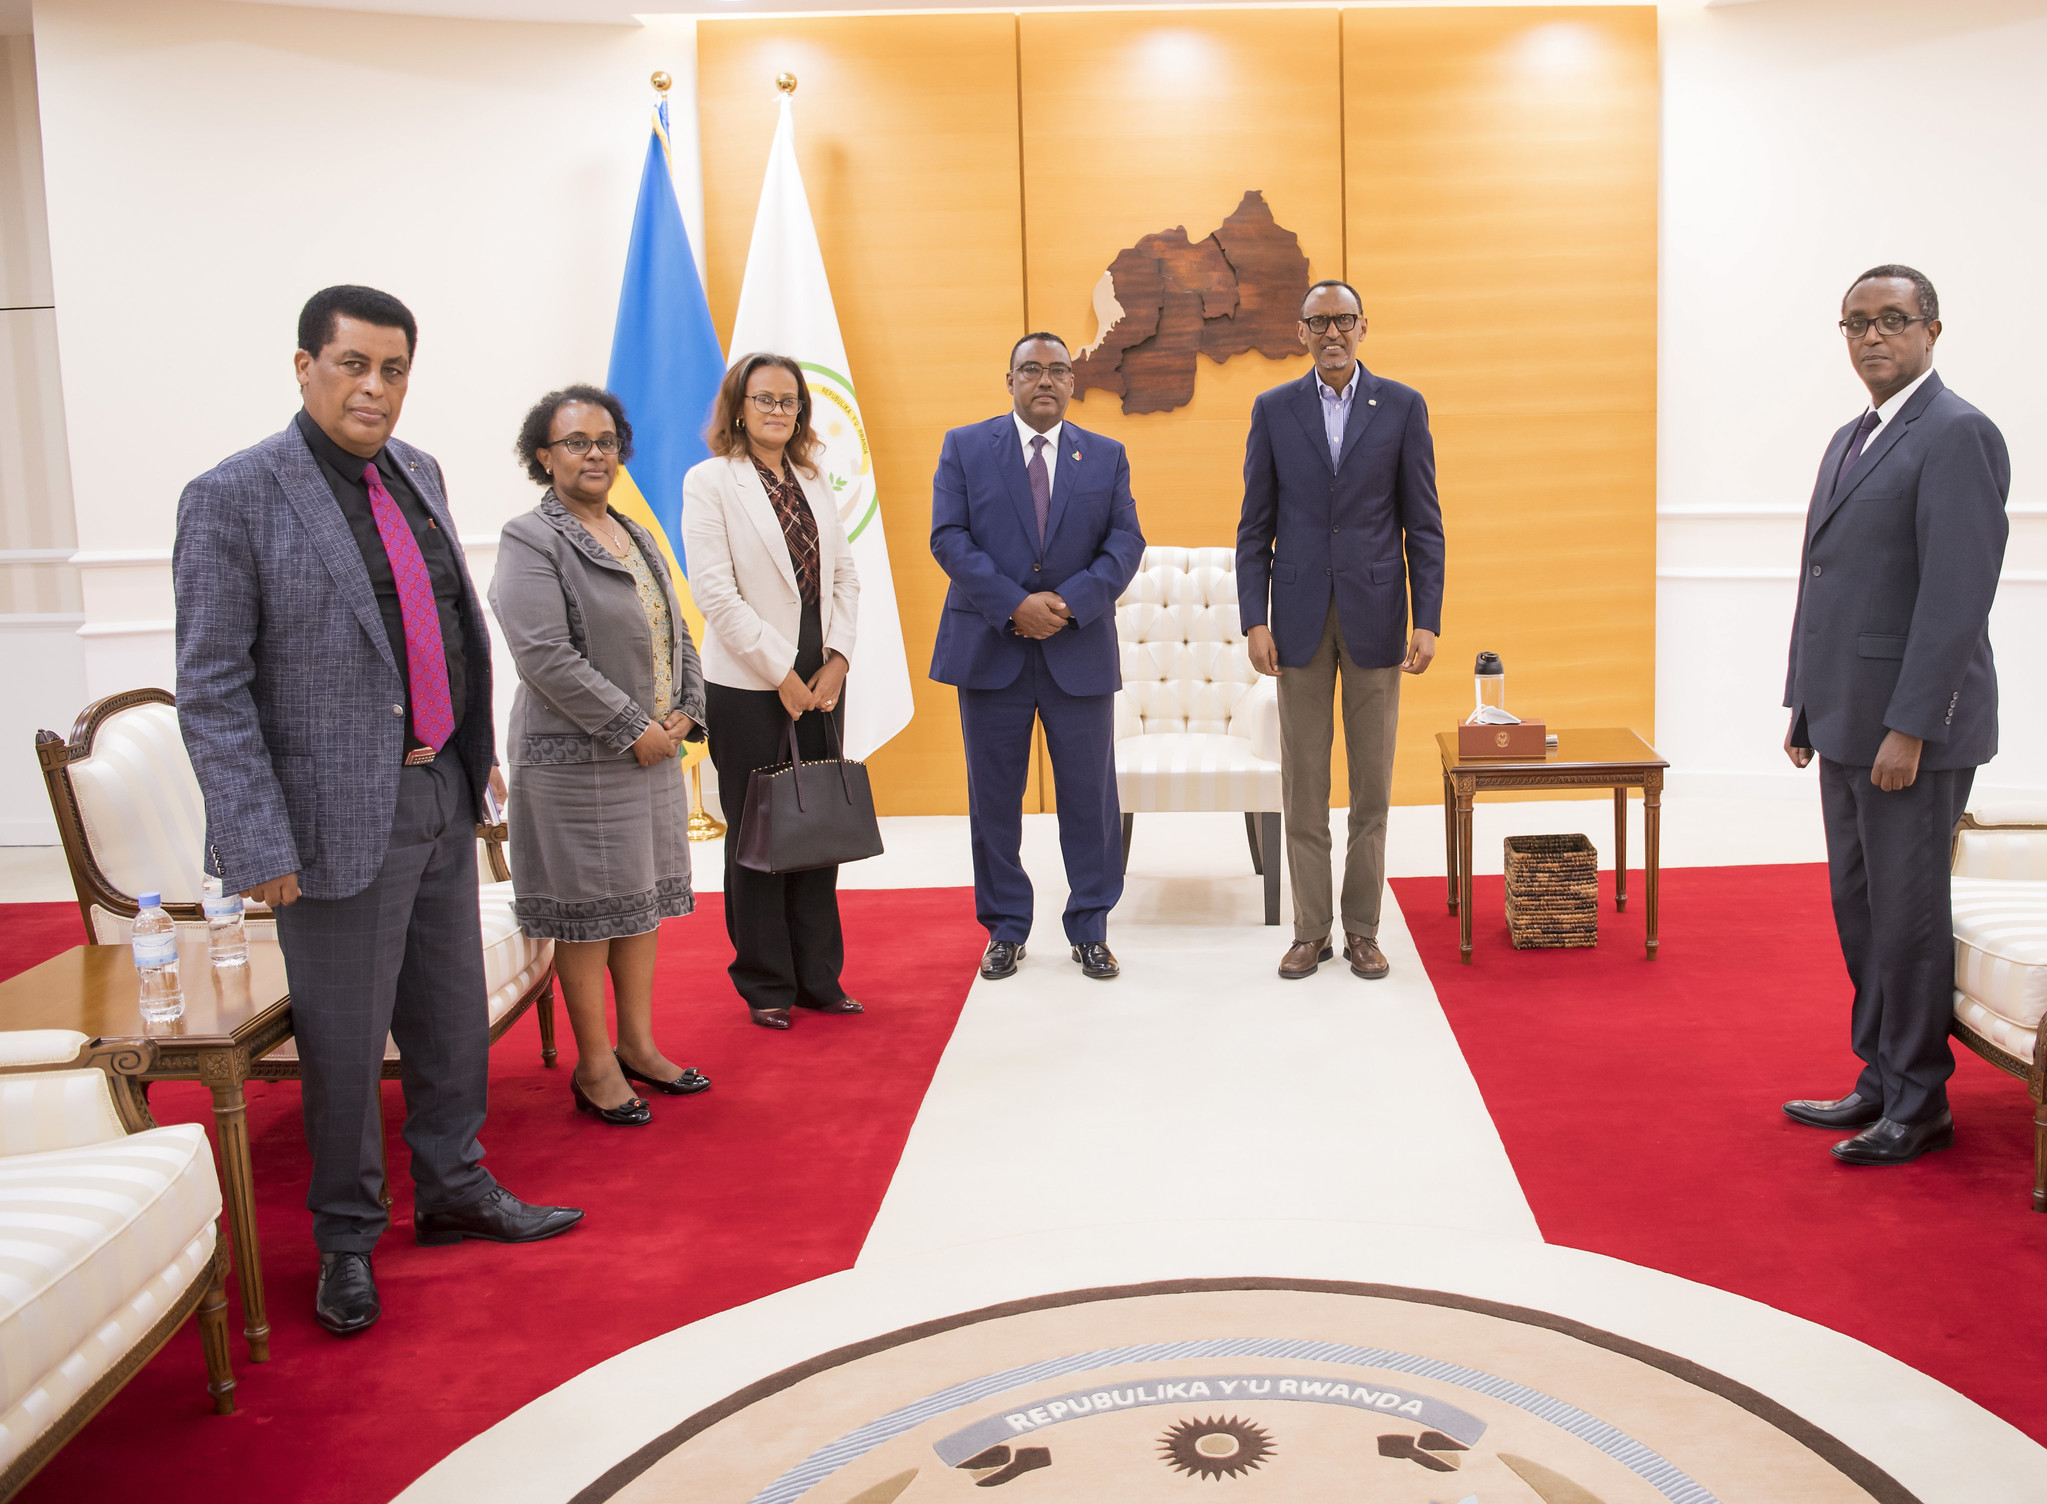 President Kagame with the Ethiopian delegation led by Deputy Prime Minister and Minister of Foreign Affairs Demeke Mekonnen (3rd from right) during their meeting at Village Urugwiro on Tuesday.